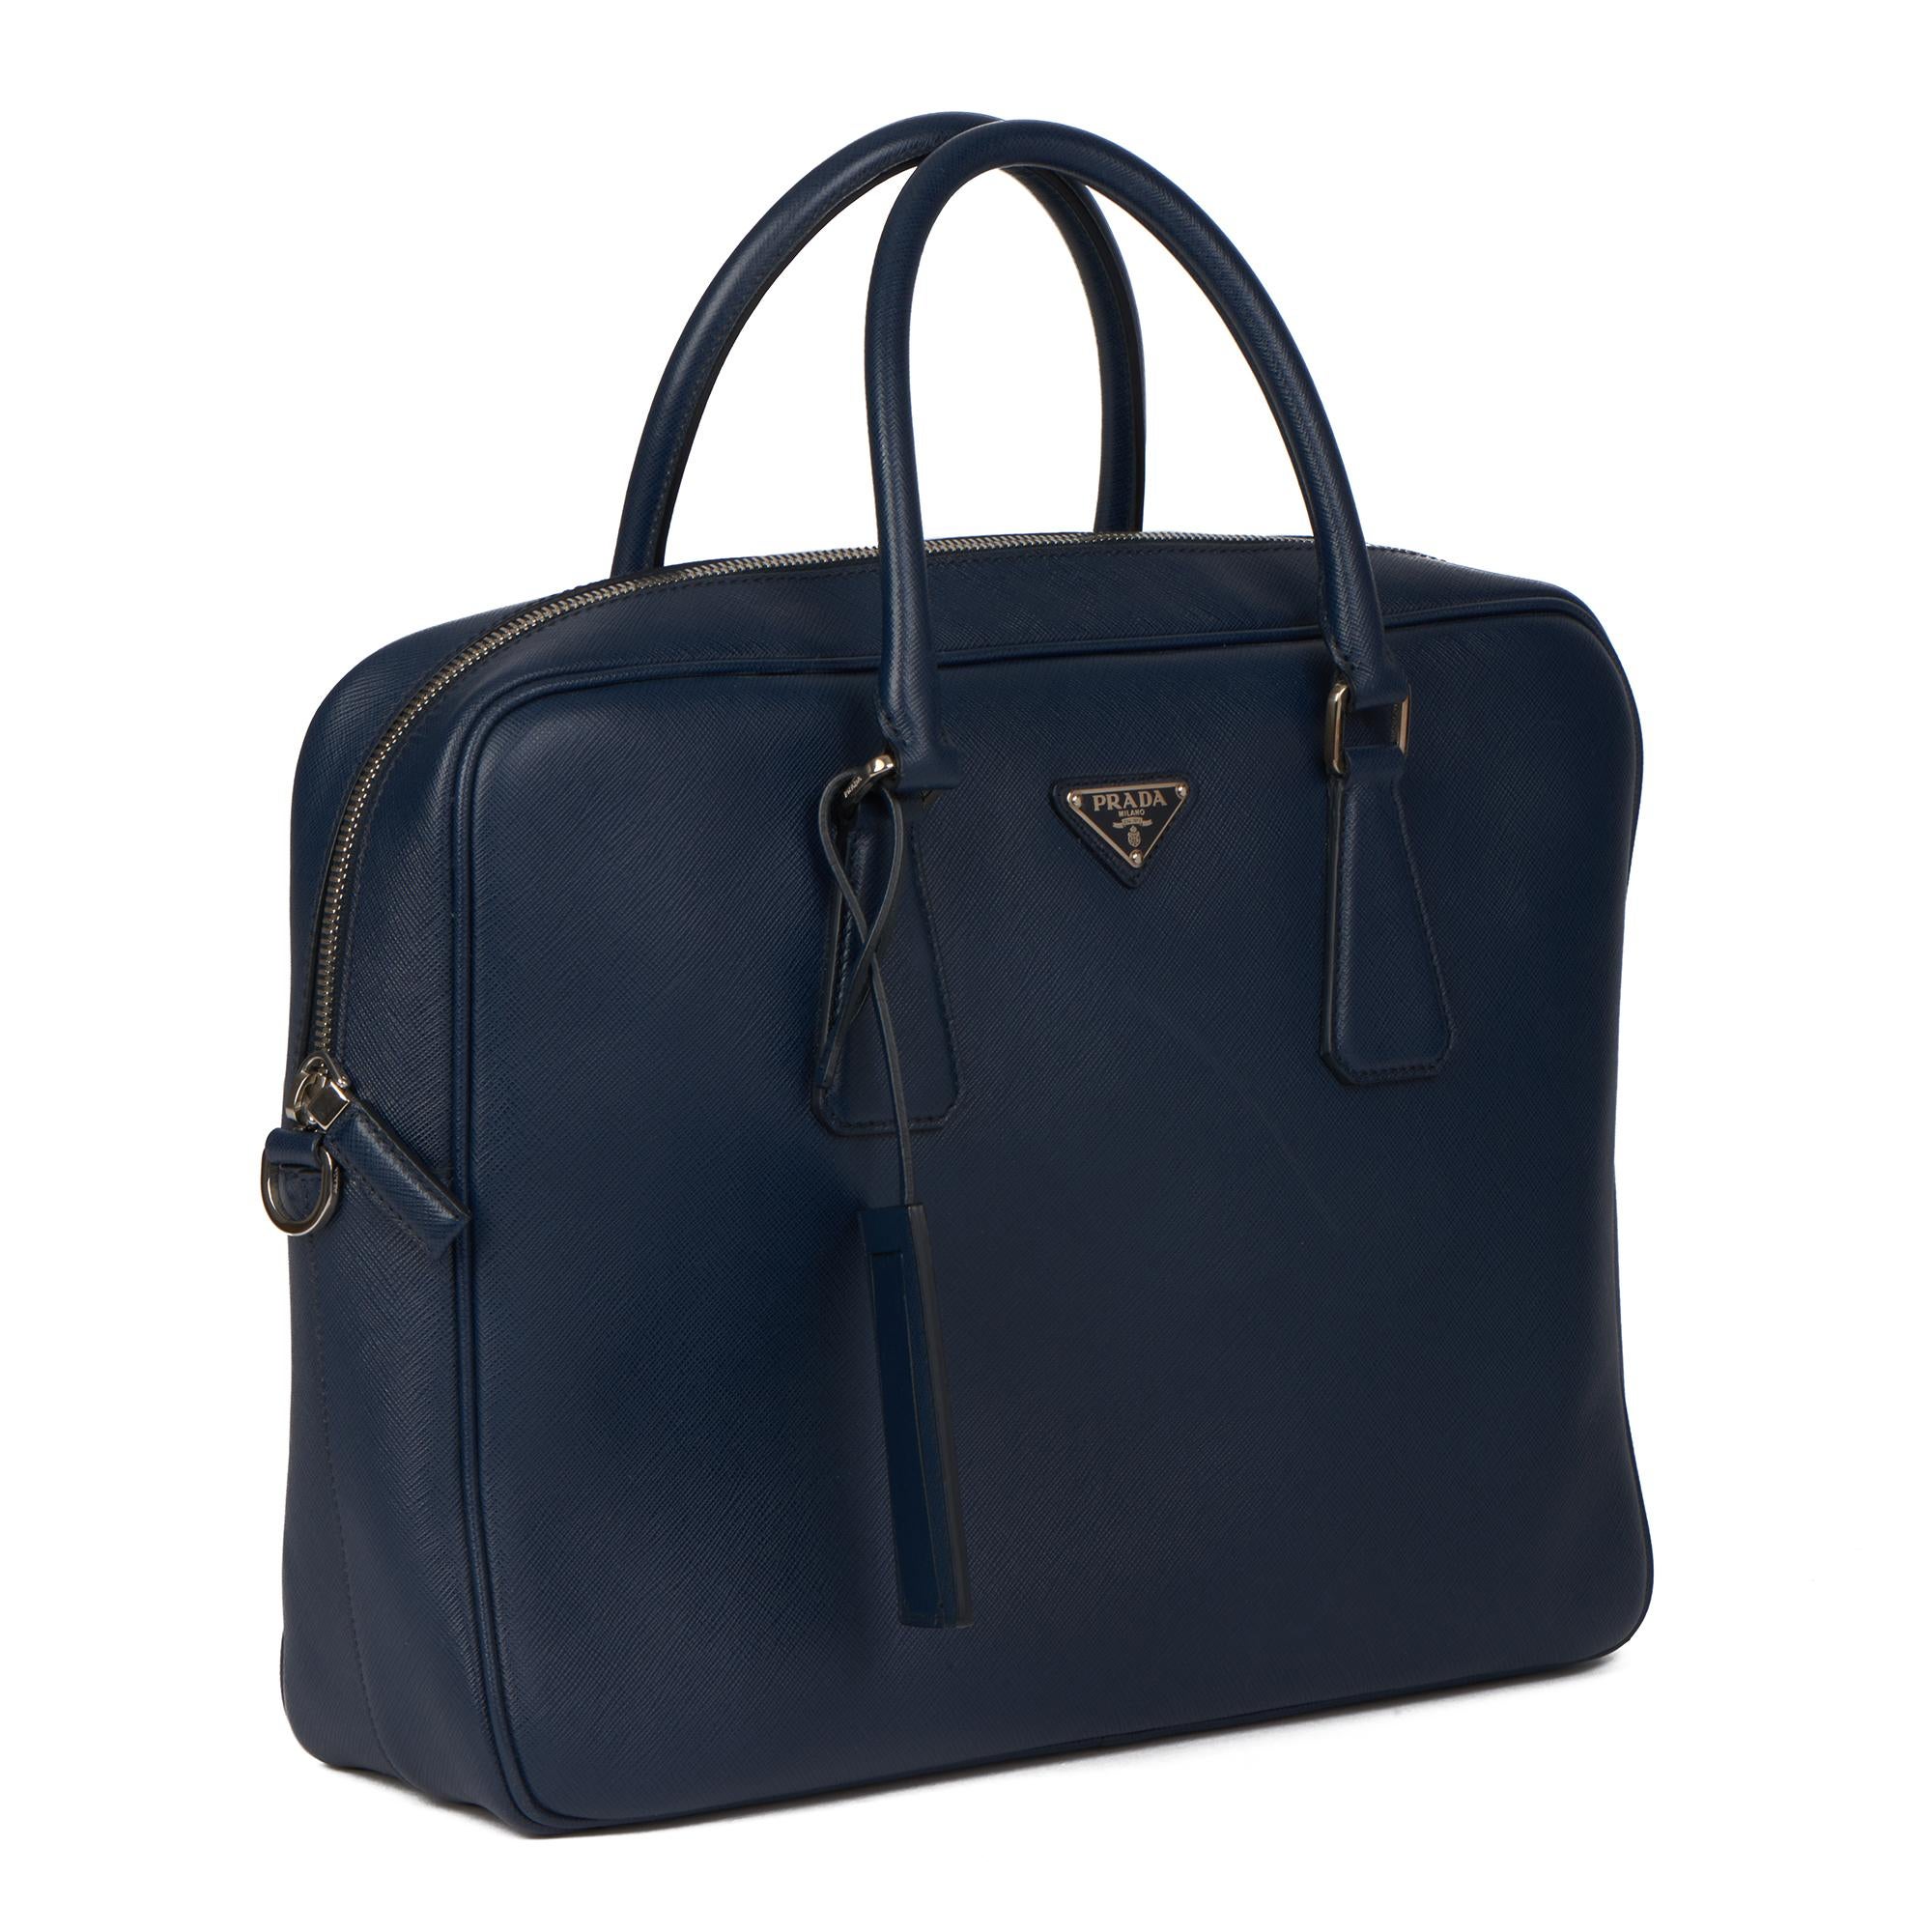 Prada BALTIC BLUE SAFFIANO LEATHER WORK BAG

ONDITION NOTES
The exterior is in excellent condition with light signs of use. There is a scuff front center of the bag.
The interior is in excellent condition with minimal signs of use.
The hardware is